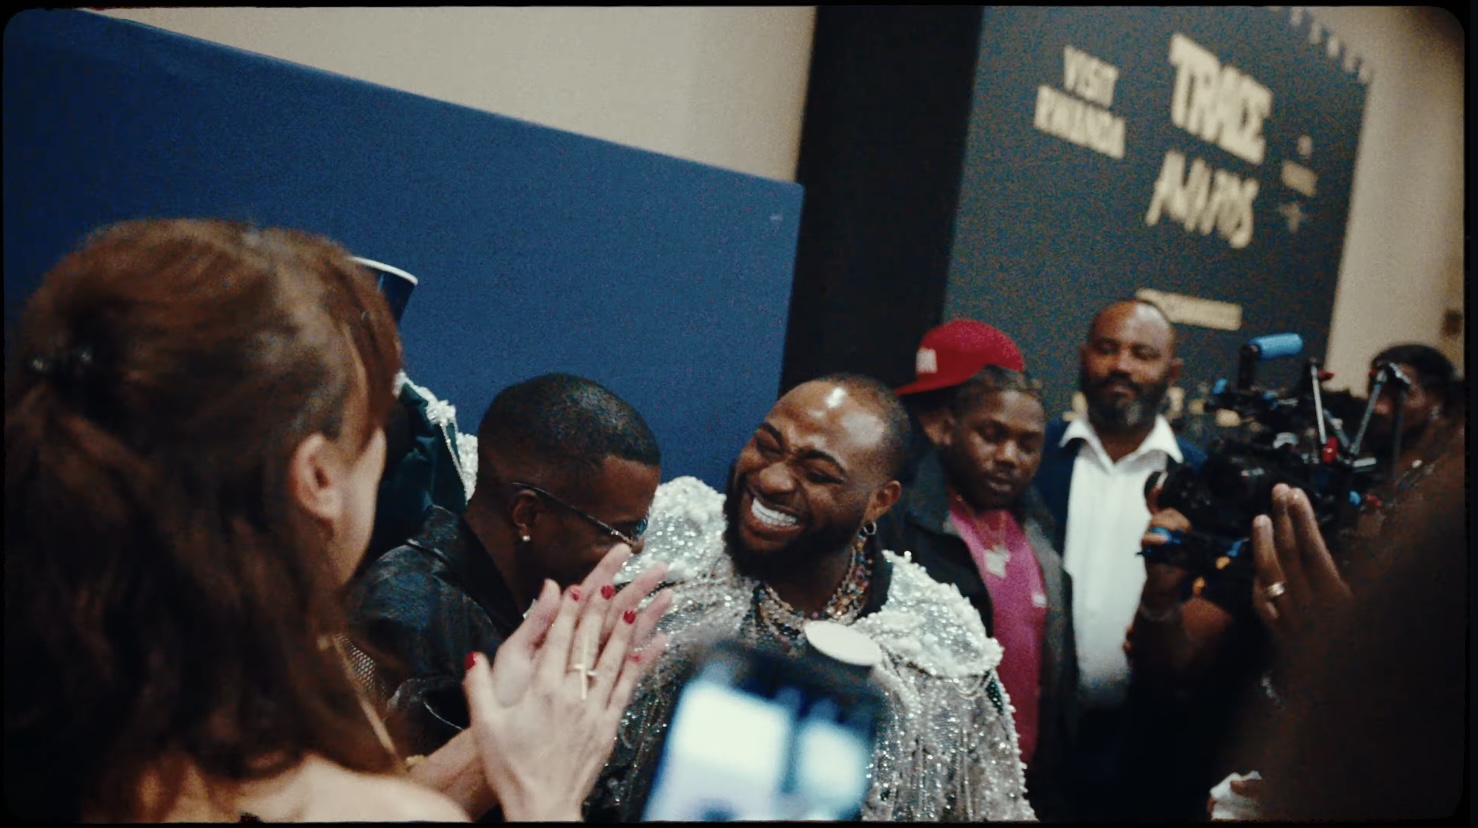 Davido is Stress-Free in Video for “Away”